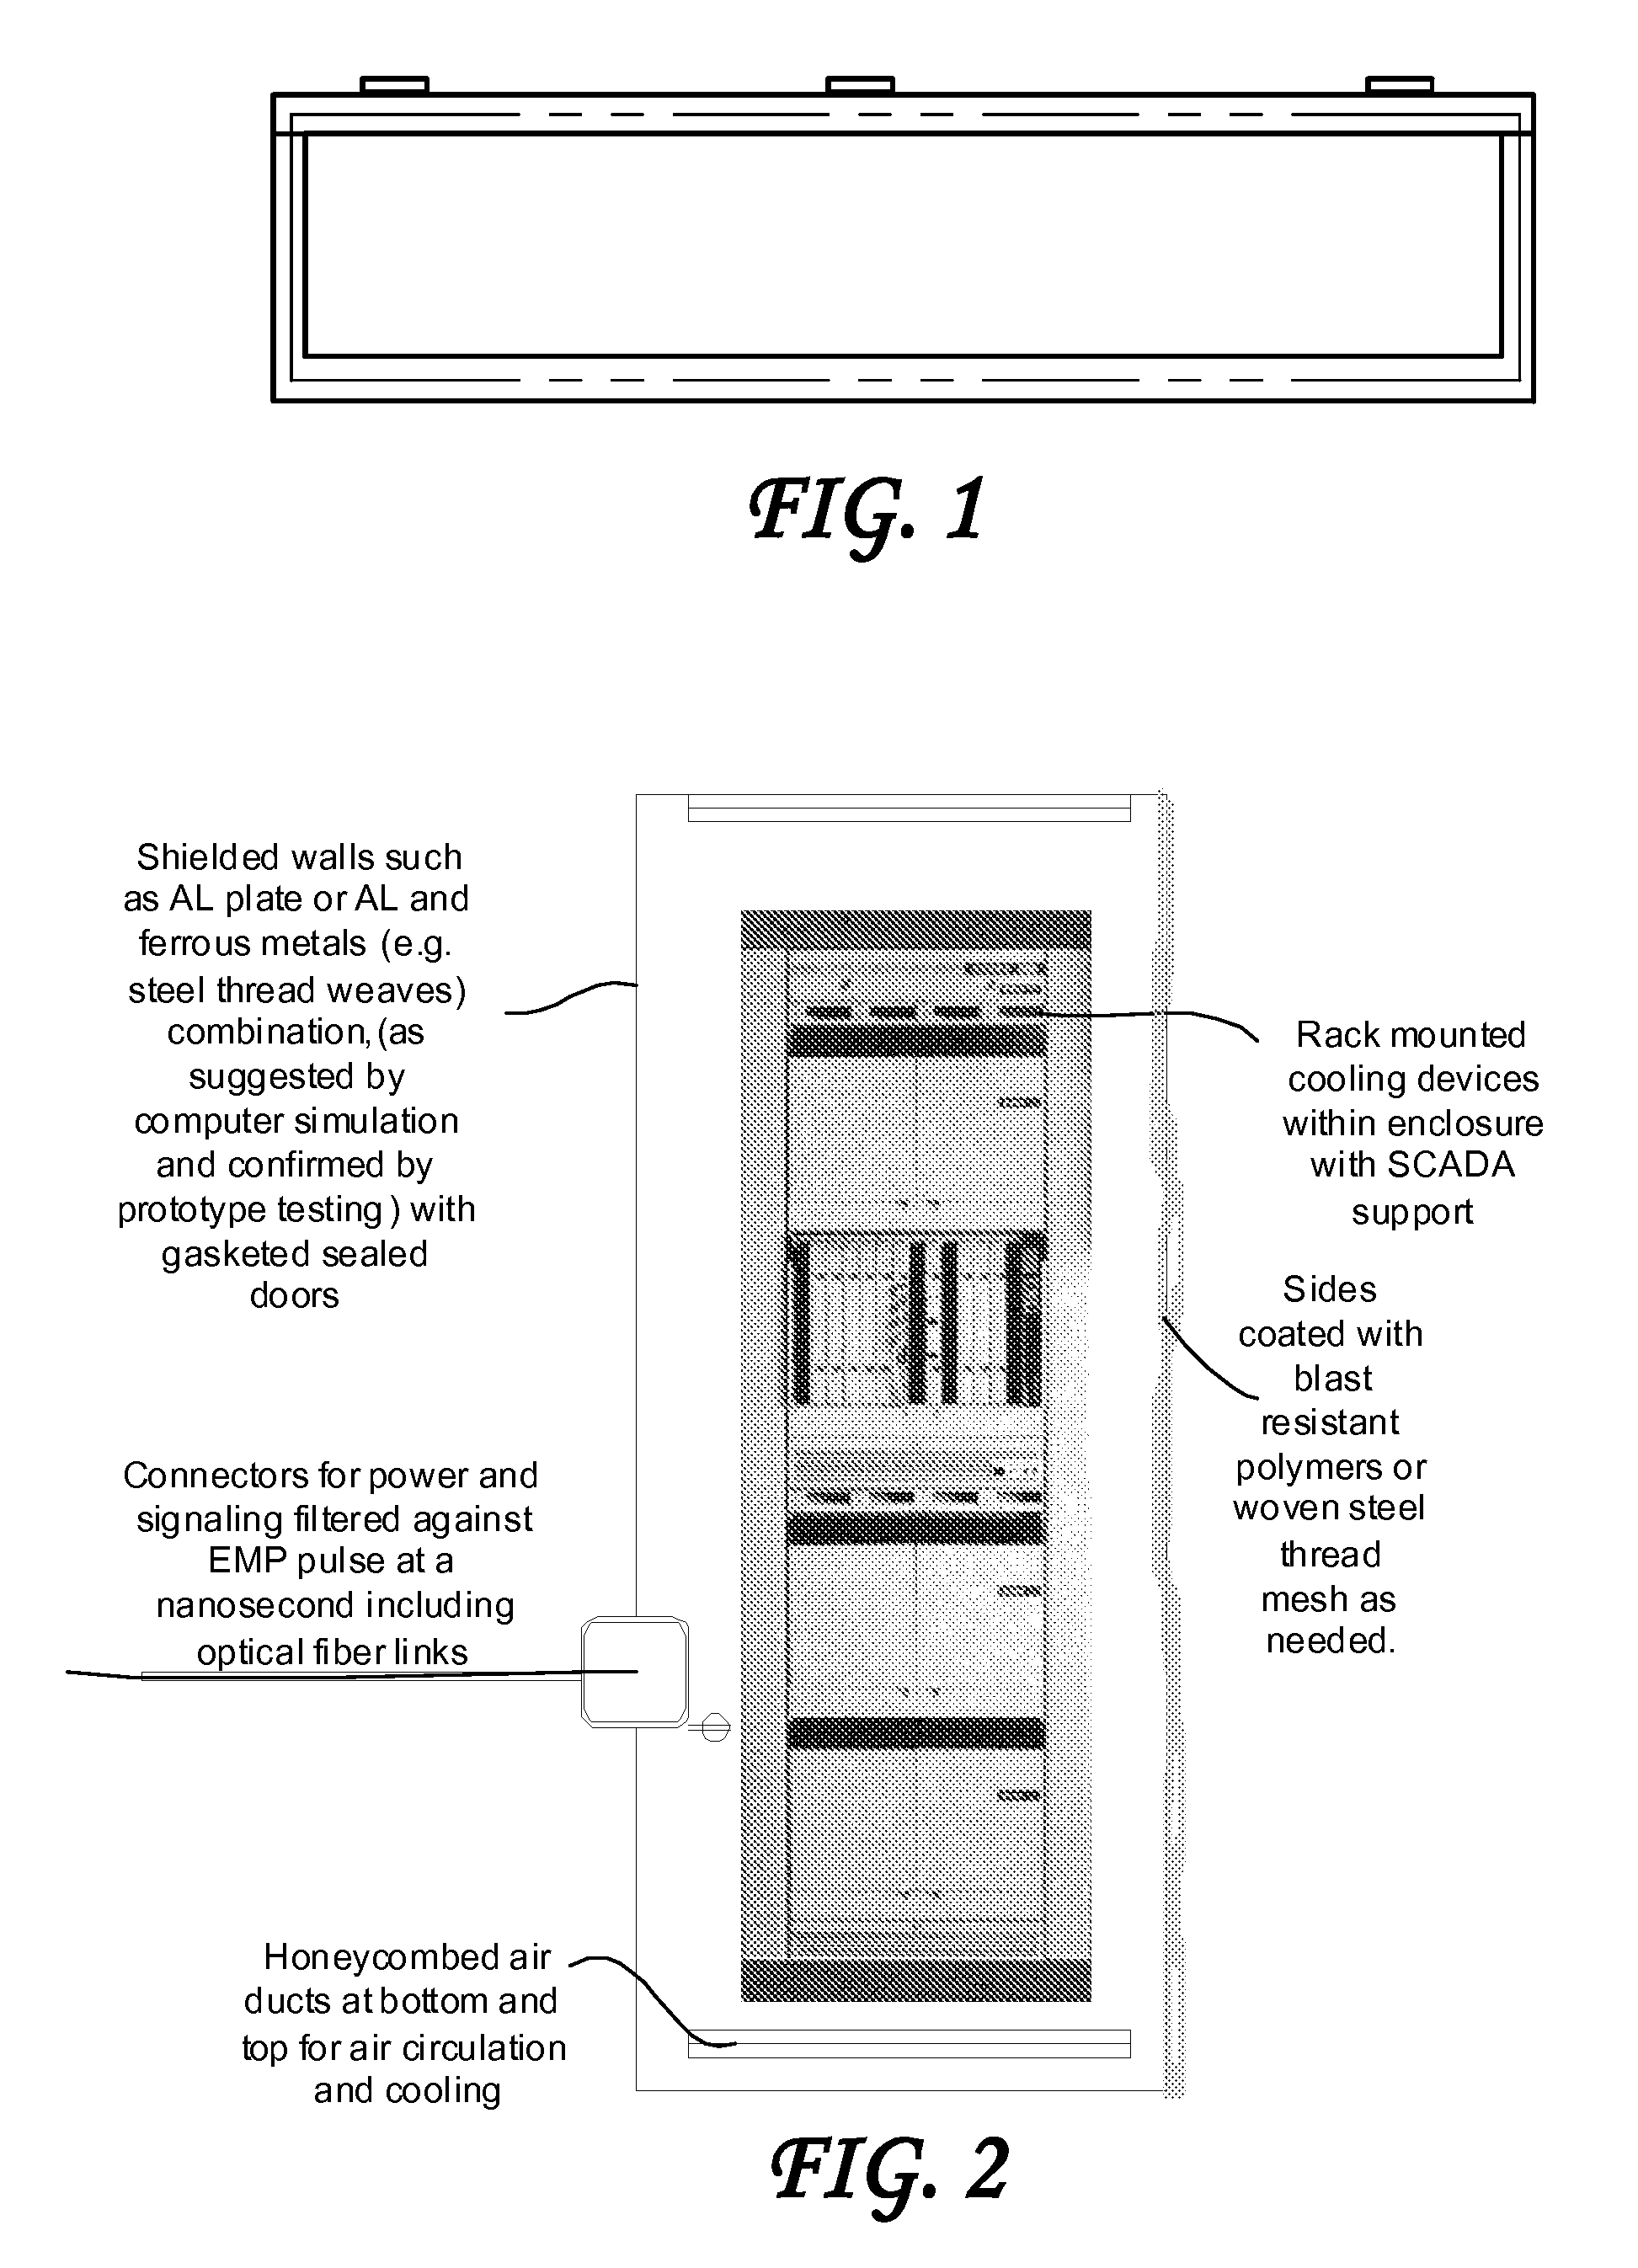 System and method for providing certifiable electromagnetic pulse and rfi protection through mass-produced shielded containers and rooms